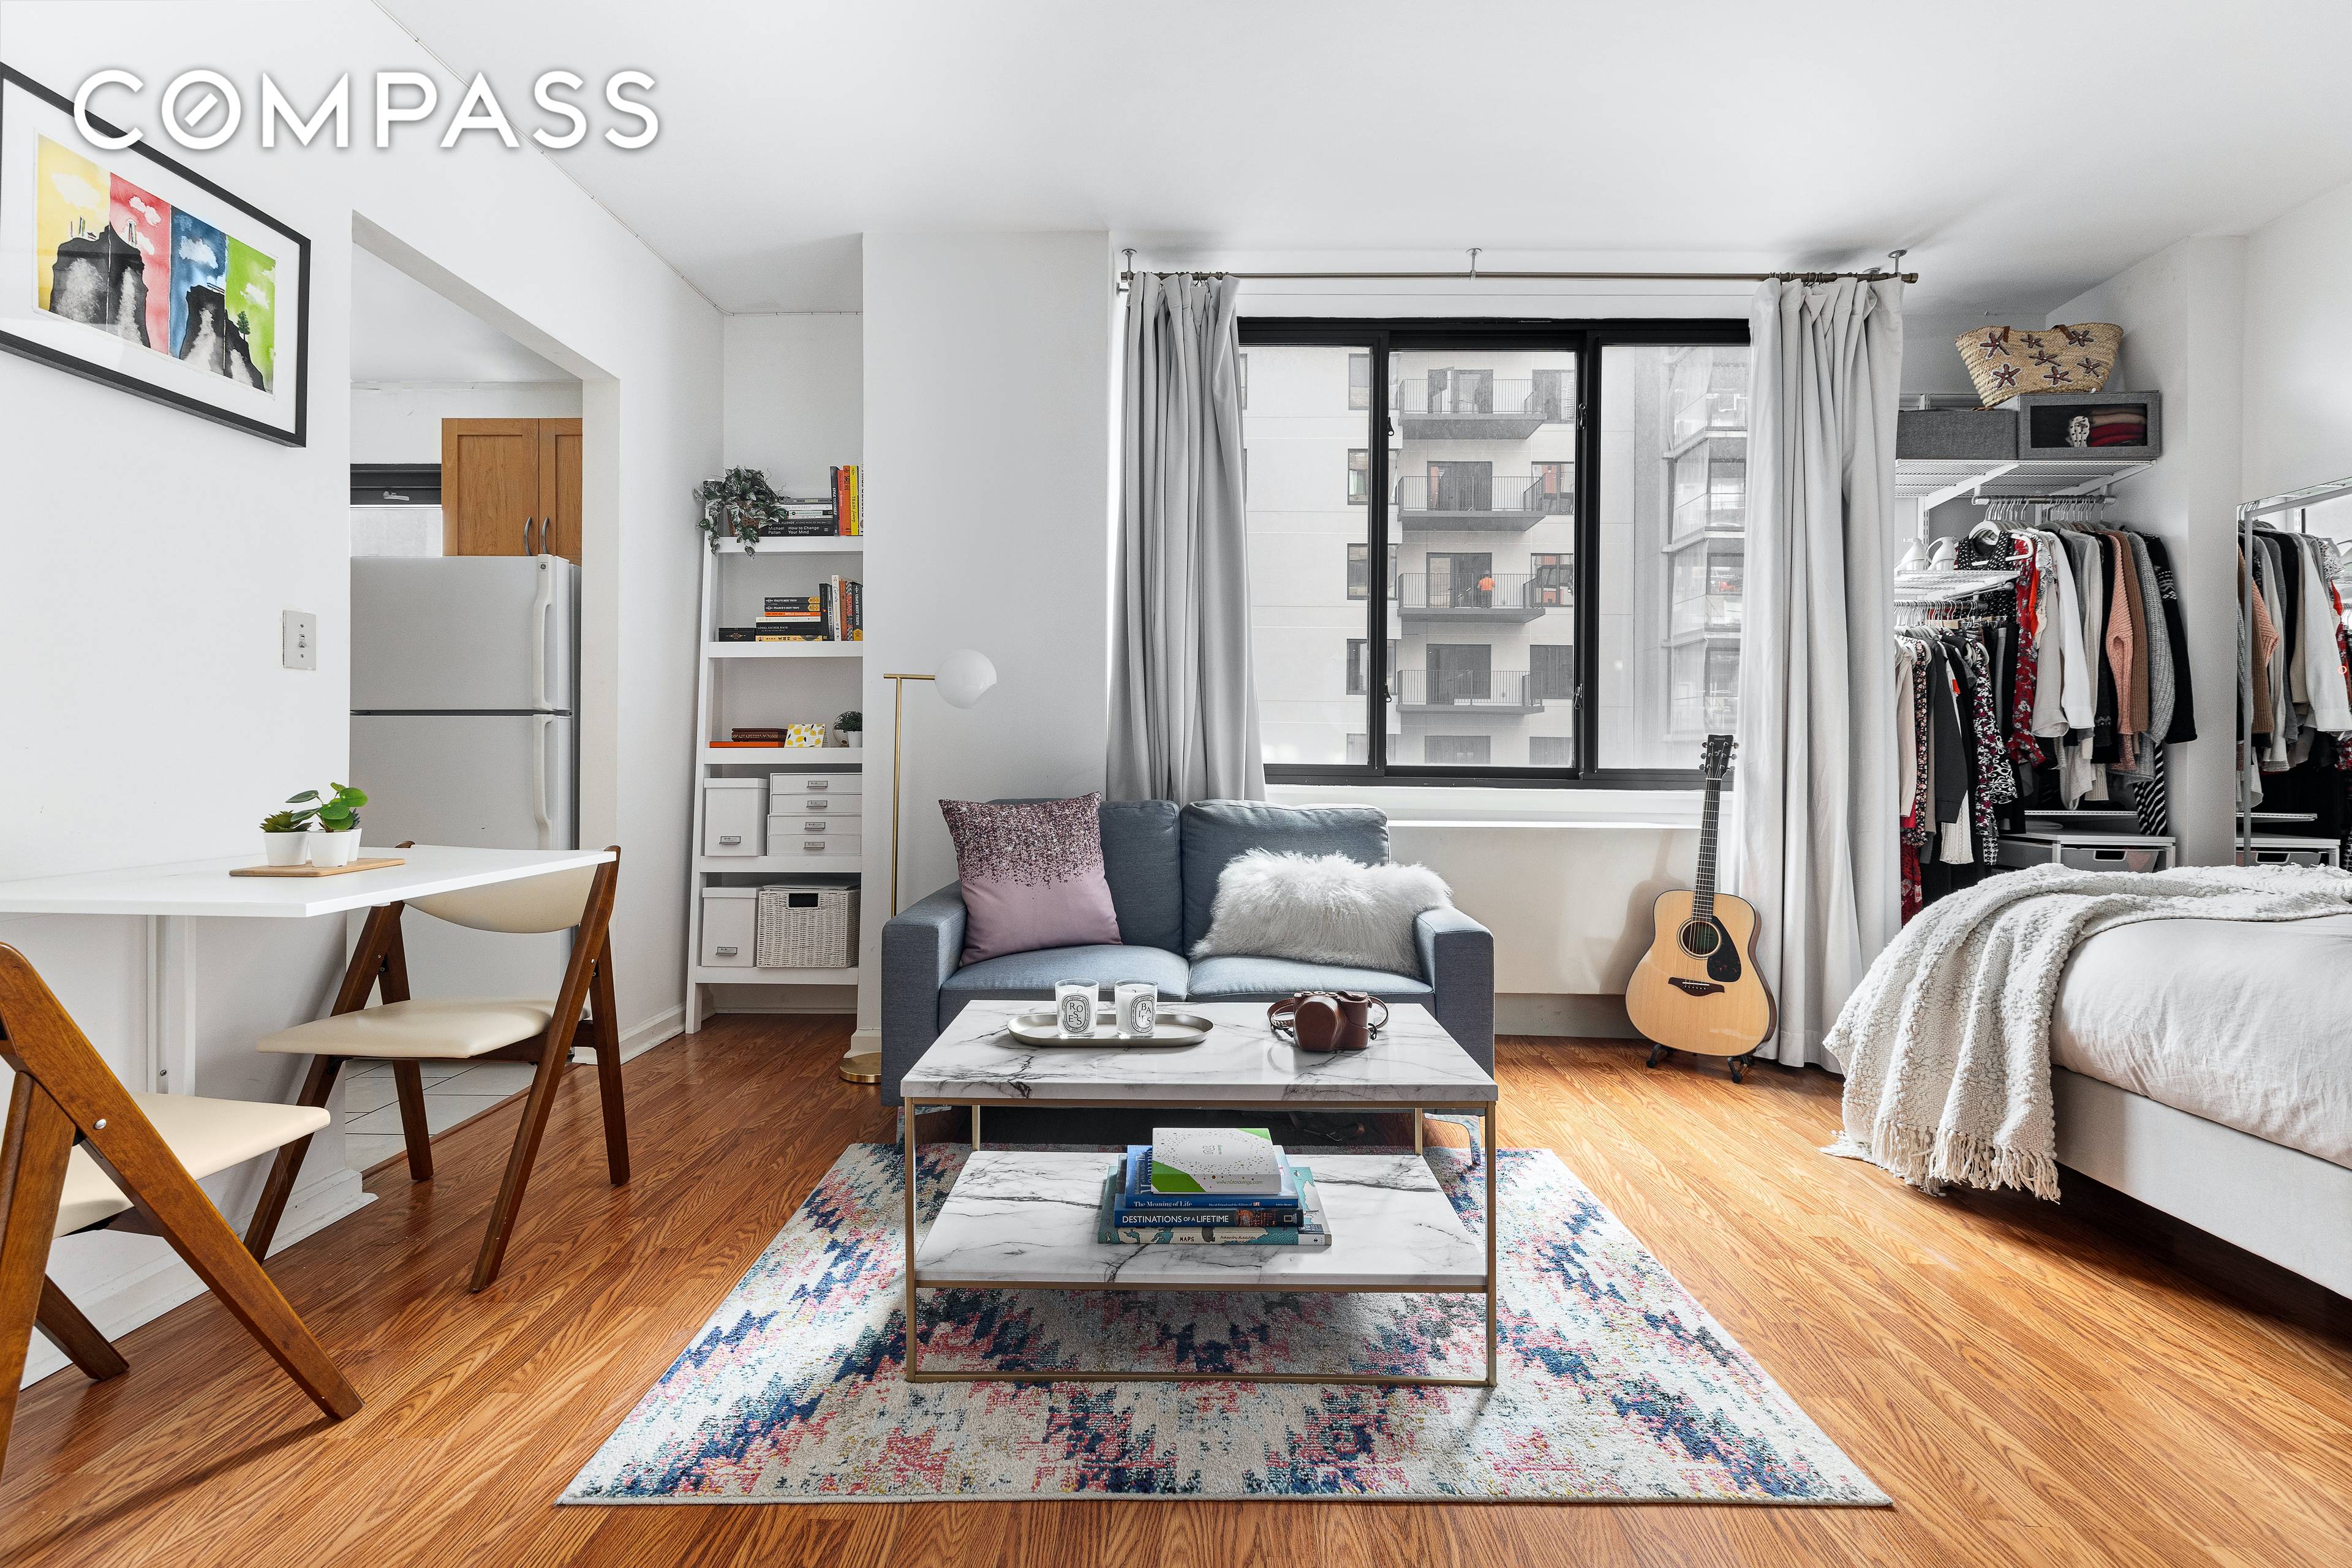 This sunny alcove studio is a true gem, located at the intersection of Soho and LES next to the best restaurants and shopping.